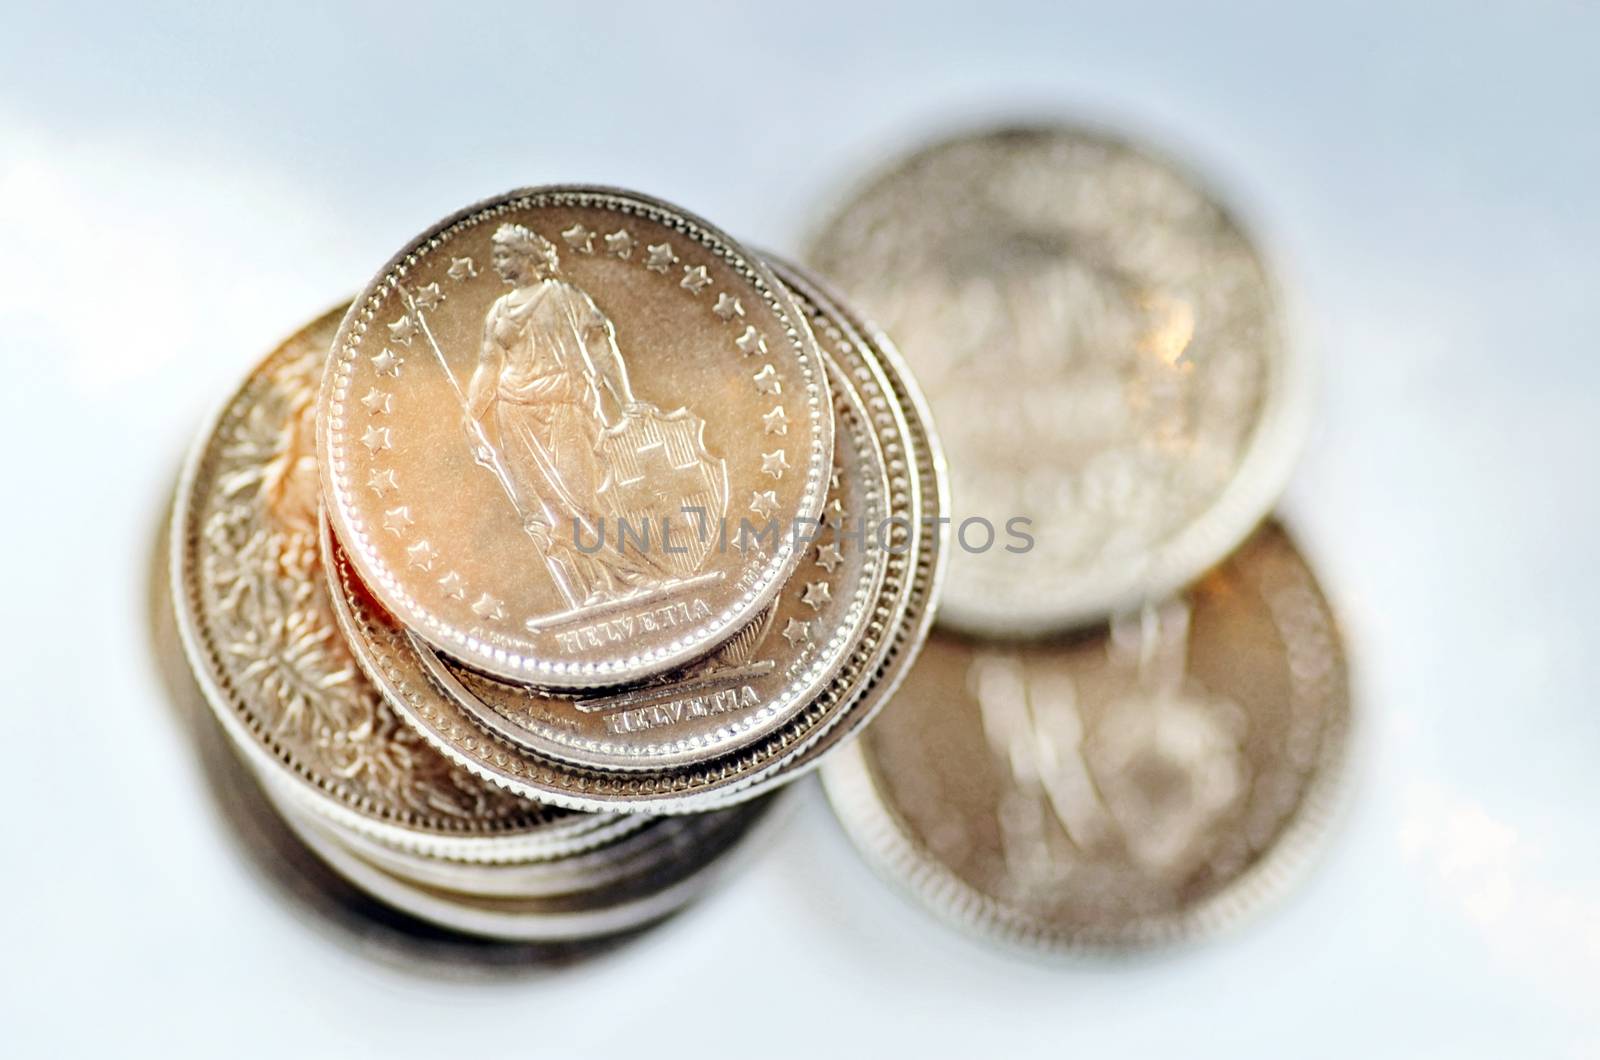 Swiss Franc coins stack by Vectorex